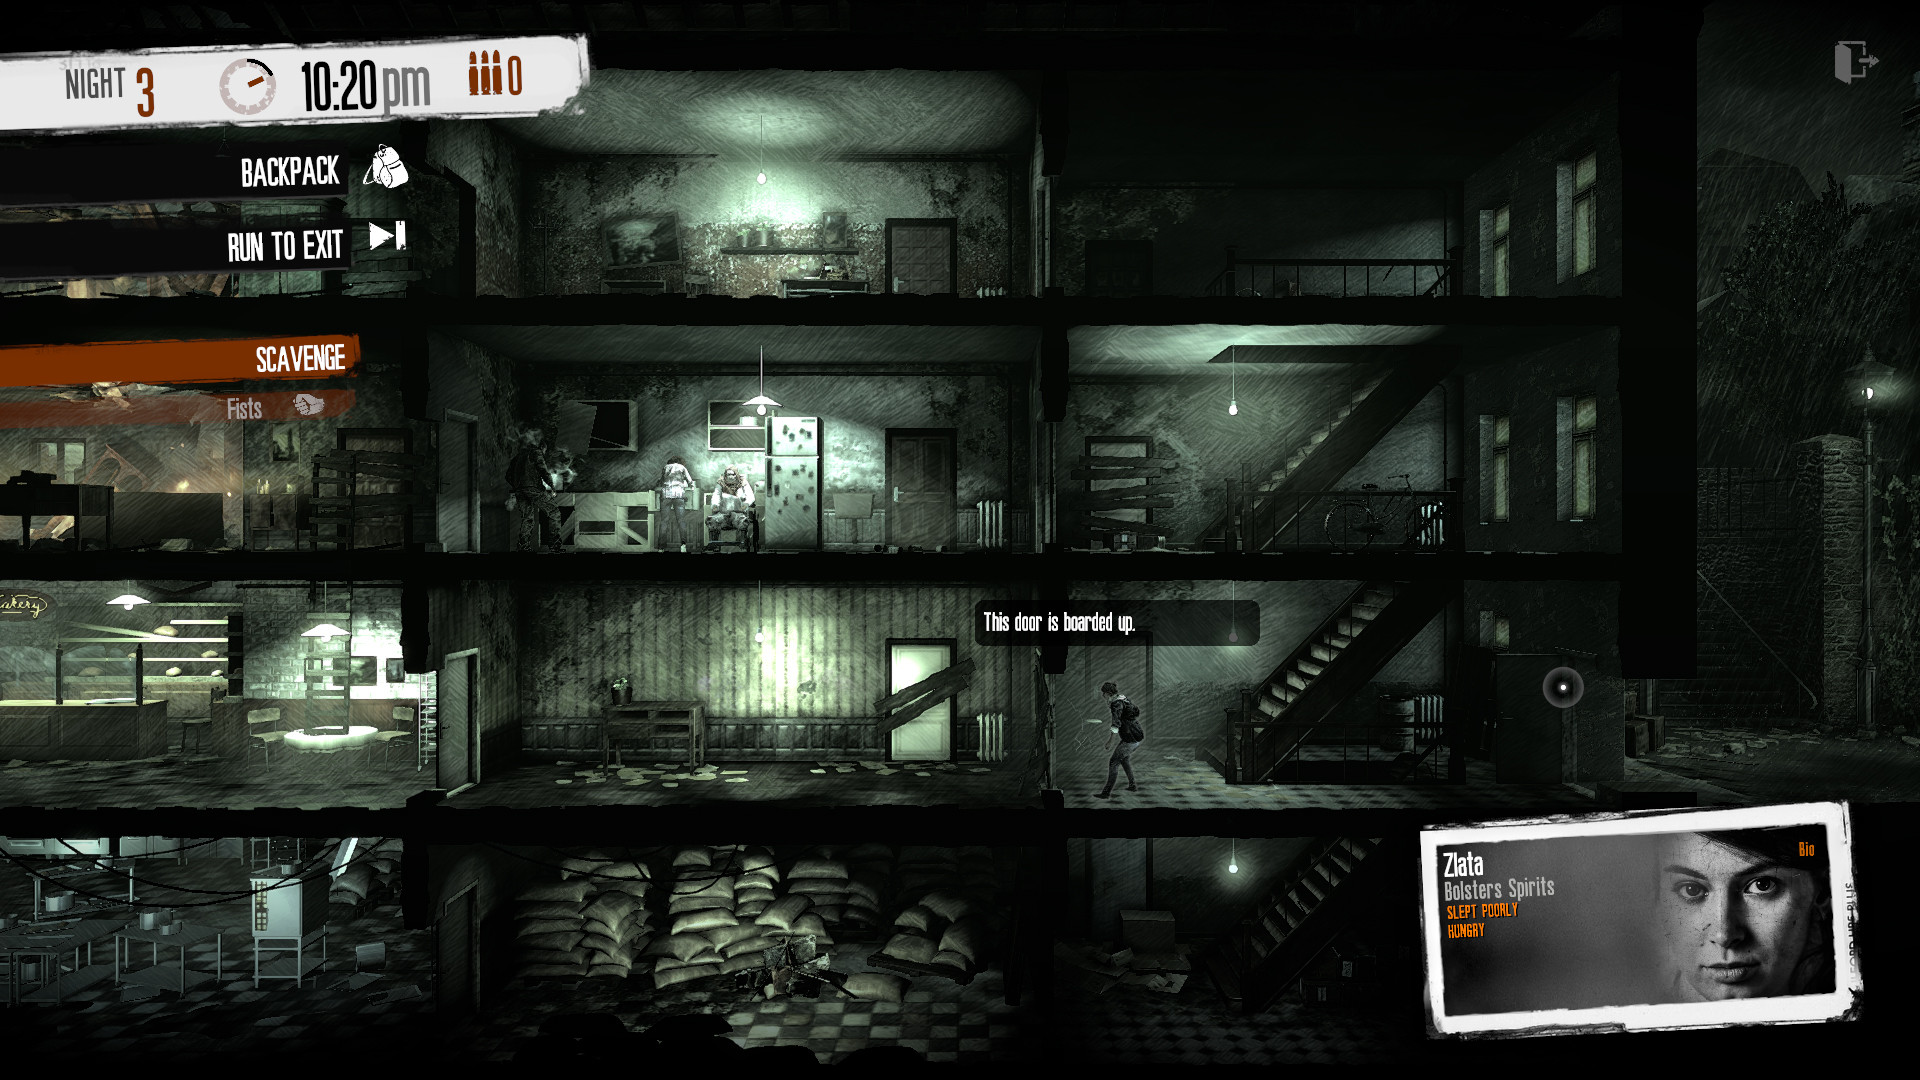 Save 80 On This War Of Mine On Steam